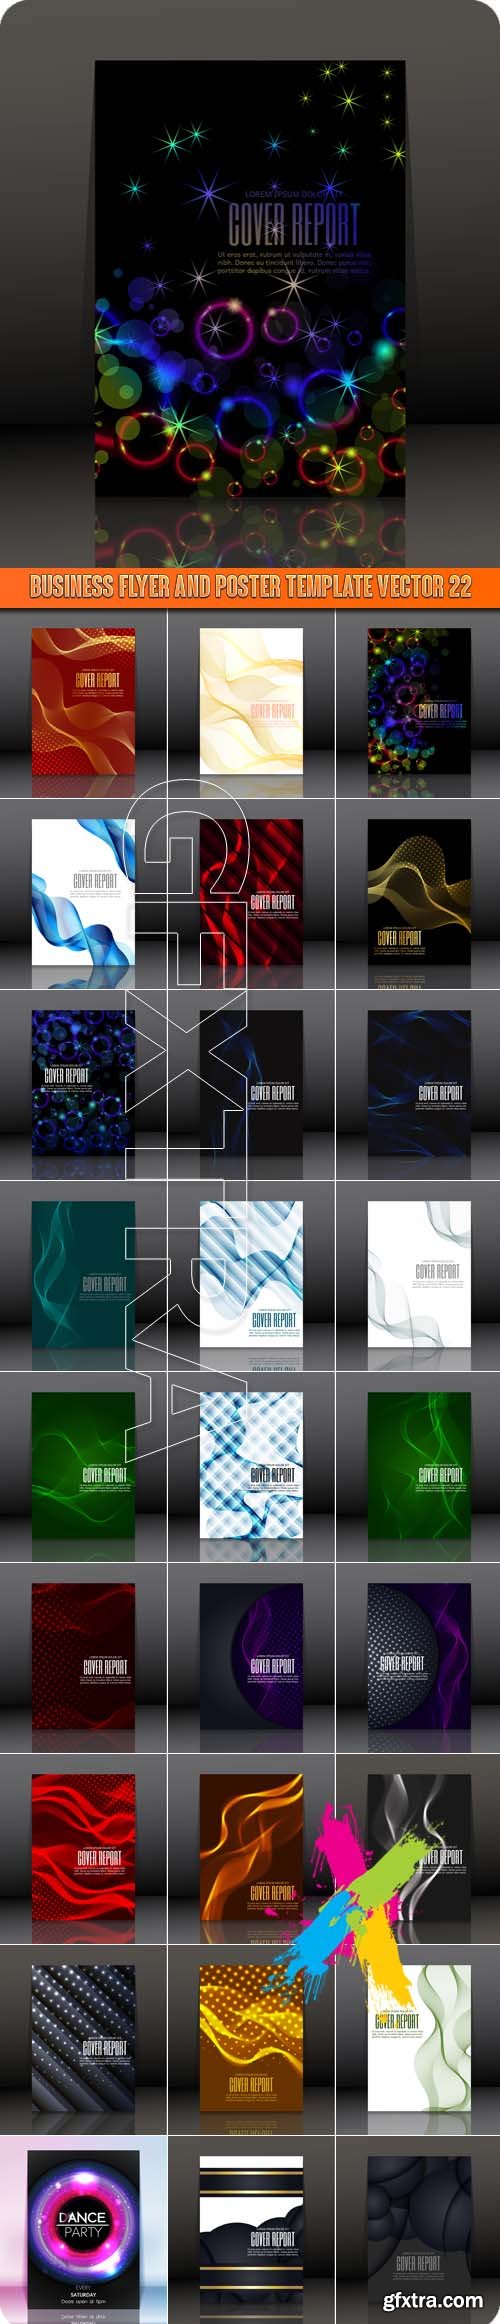 Business Flyer and Poster Template Vector 22